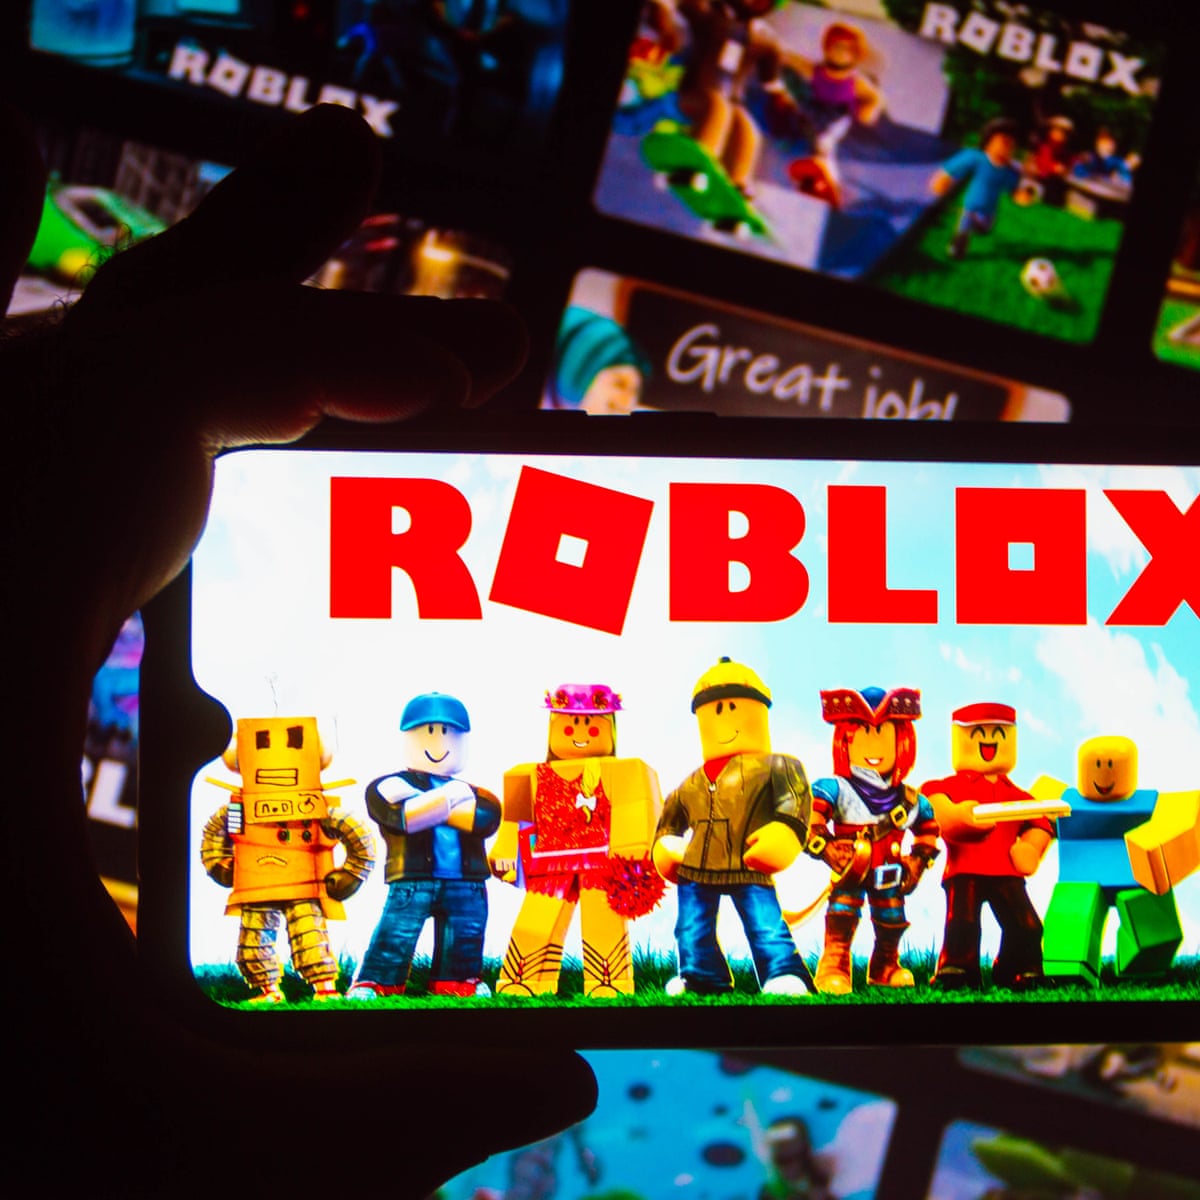 Roblox Business Model - How Does Roblox Make Money?